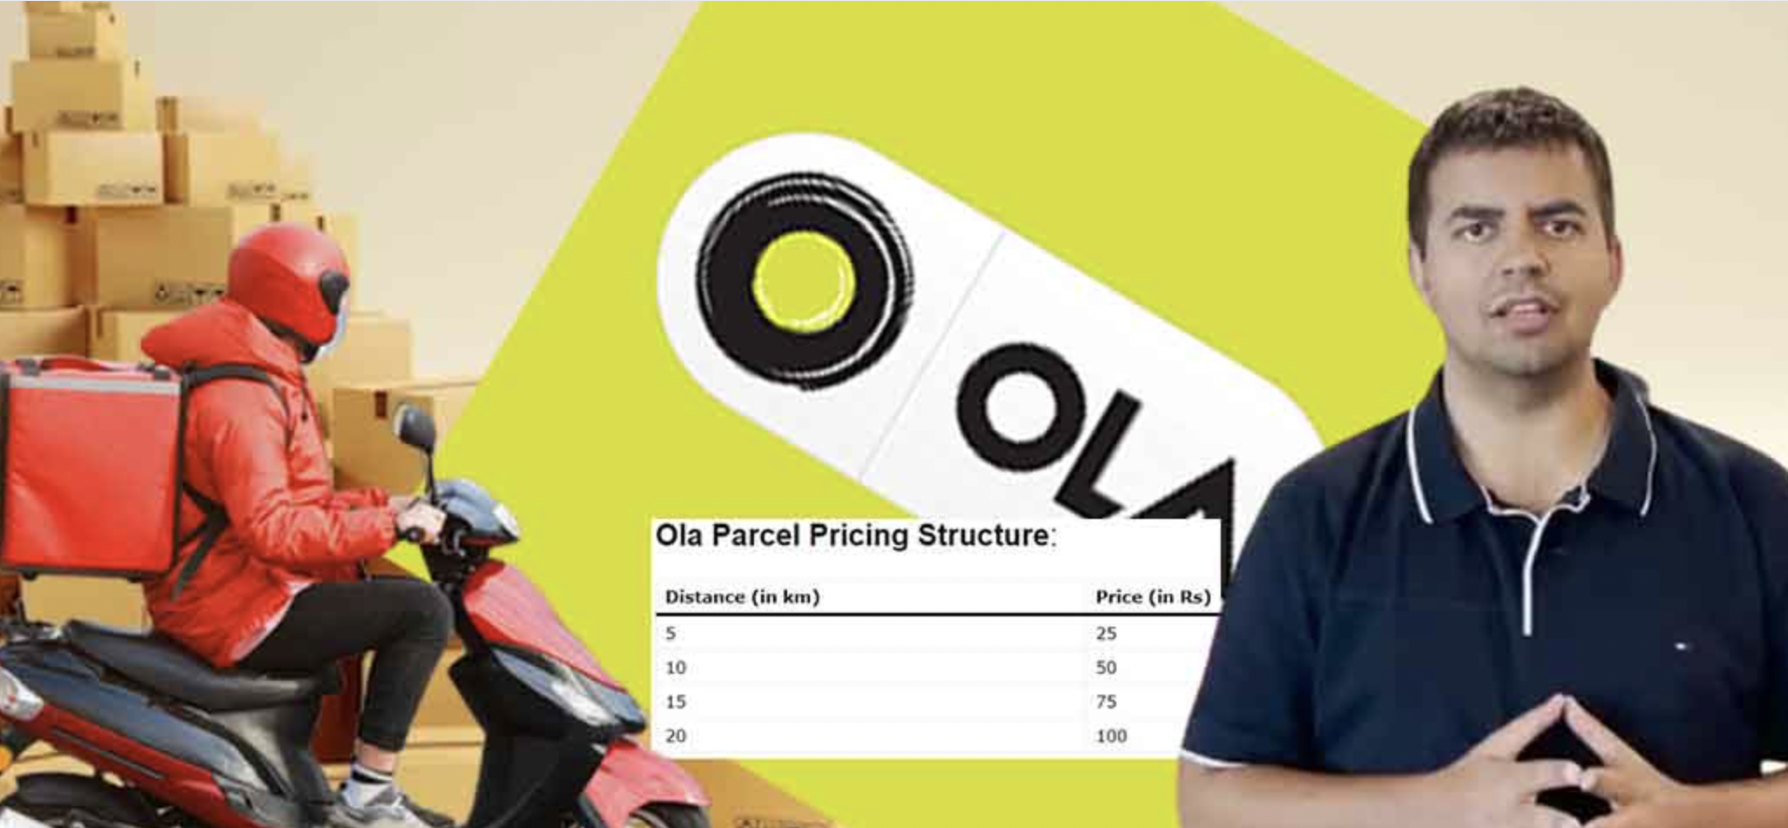 Ola Will Now Deliver Parcels, Just Like Dunzo & Swiggy Genie: Rs 25 For 5 Kms! (Can It Disrupt Logistics Industry?)